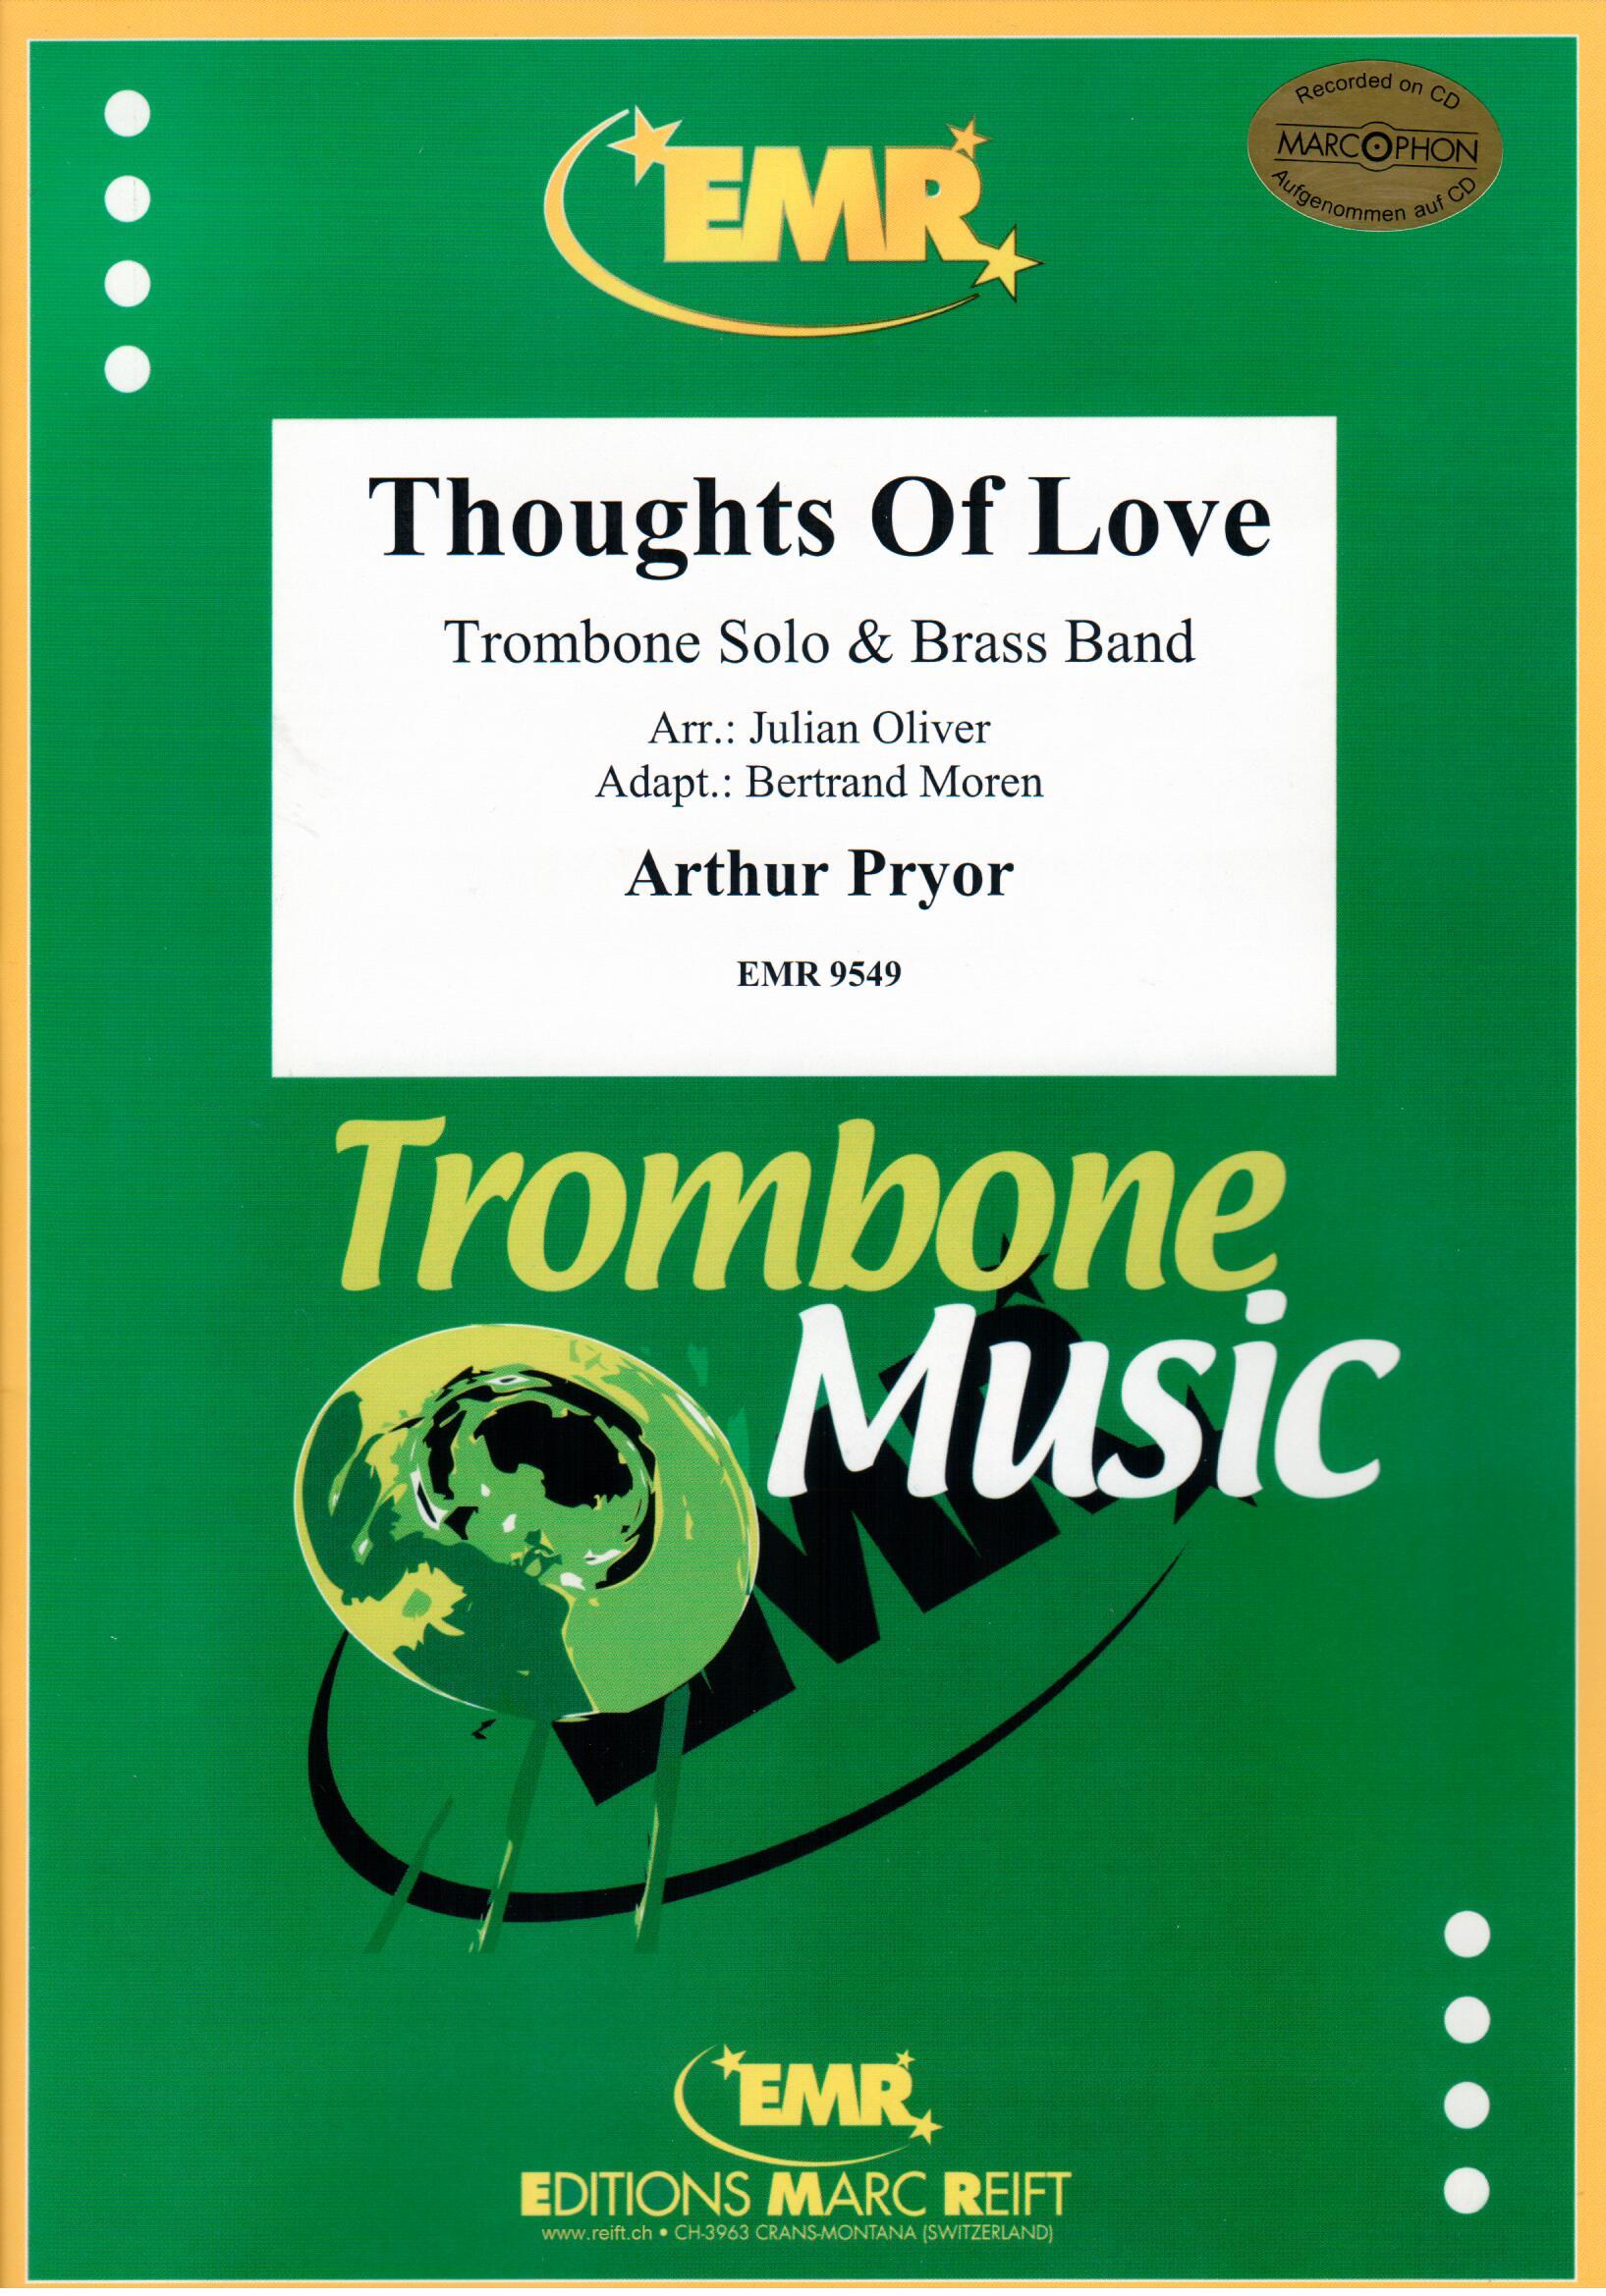 THOUGHTS OF LOVE, EMR BRASS BAND